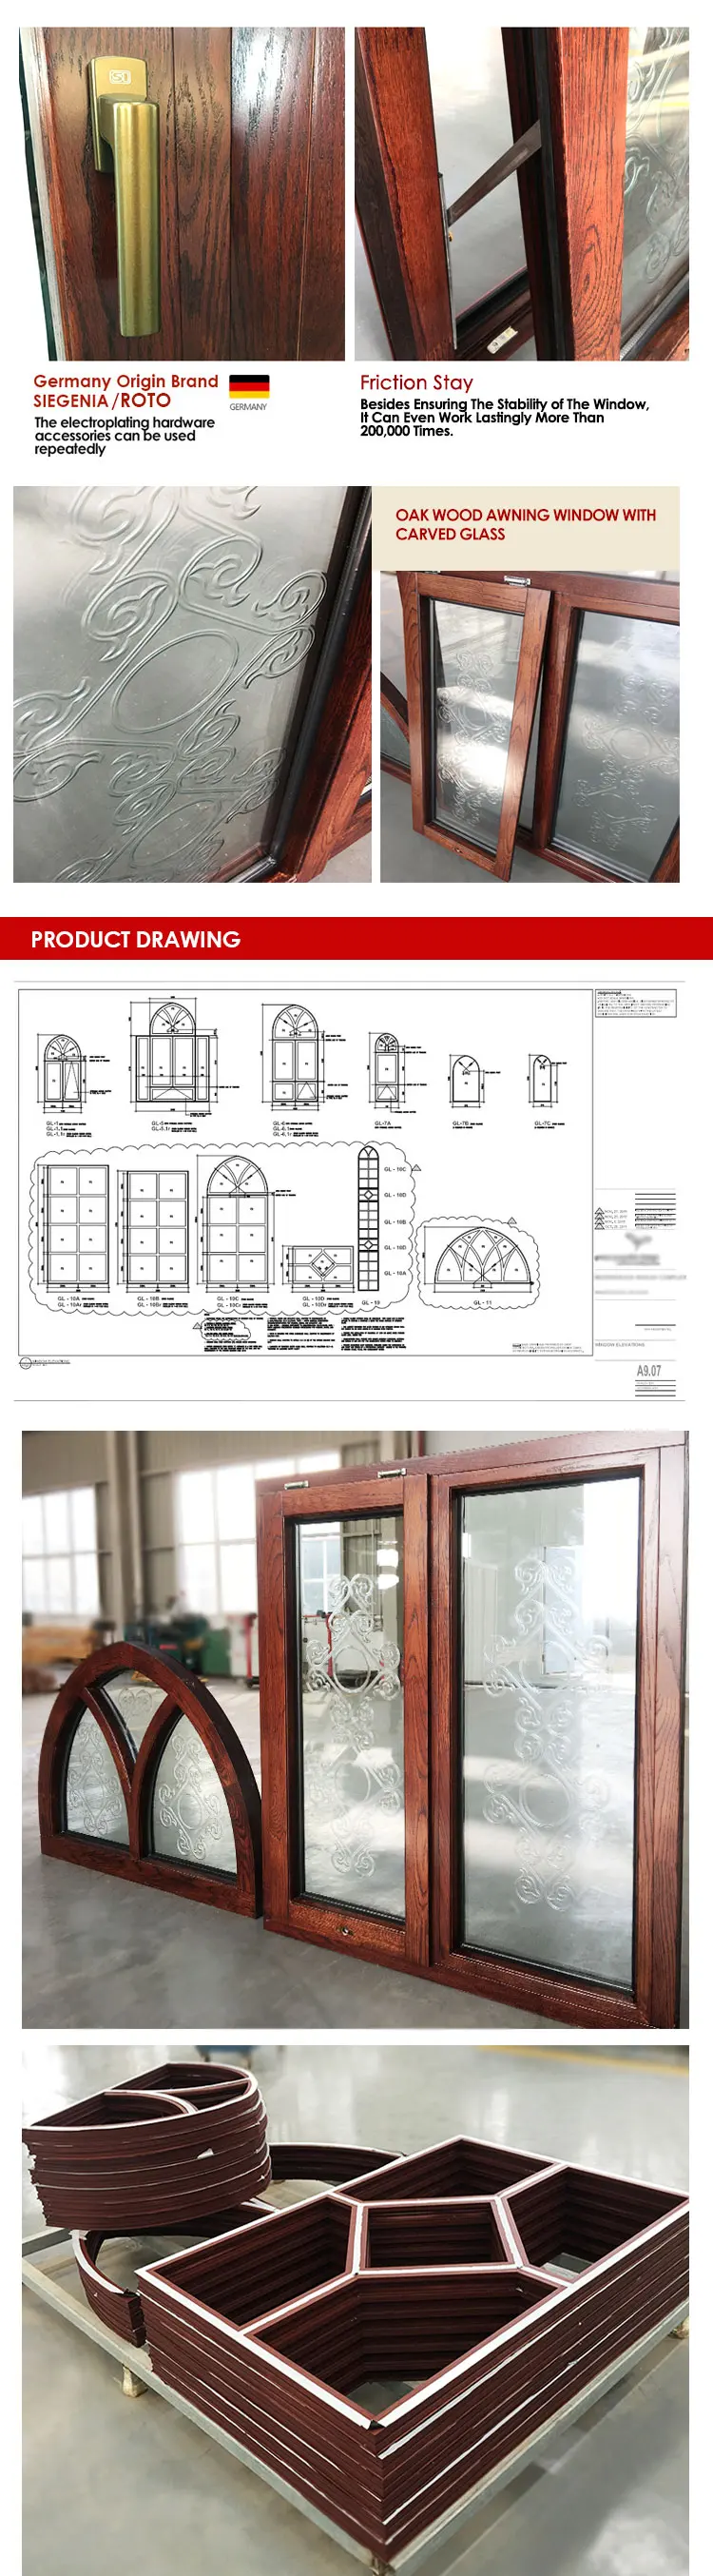 Doorwin Top Grade Traditional Tempered Stained Glass Church Windows Weatherproofing French Swing Designs Casement windows Images